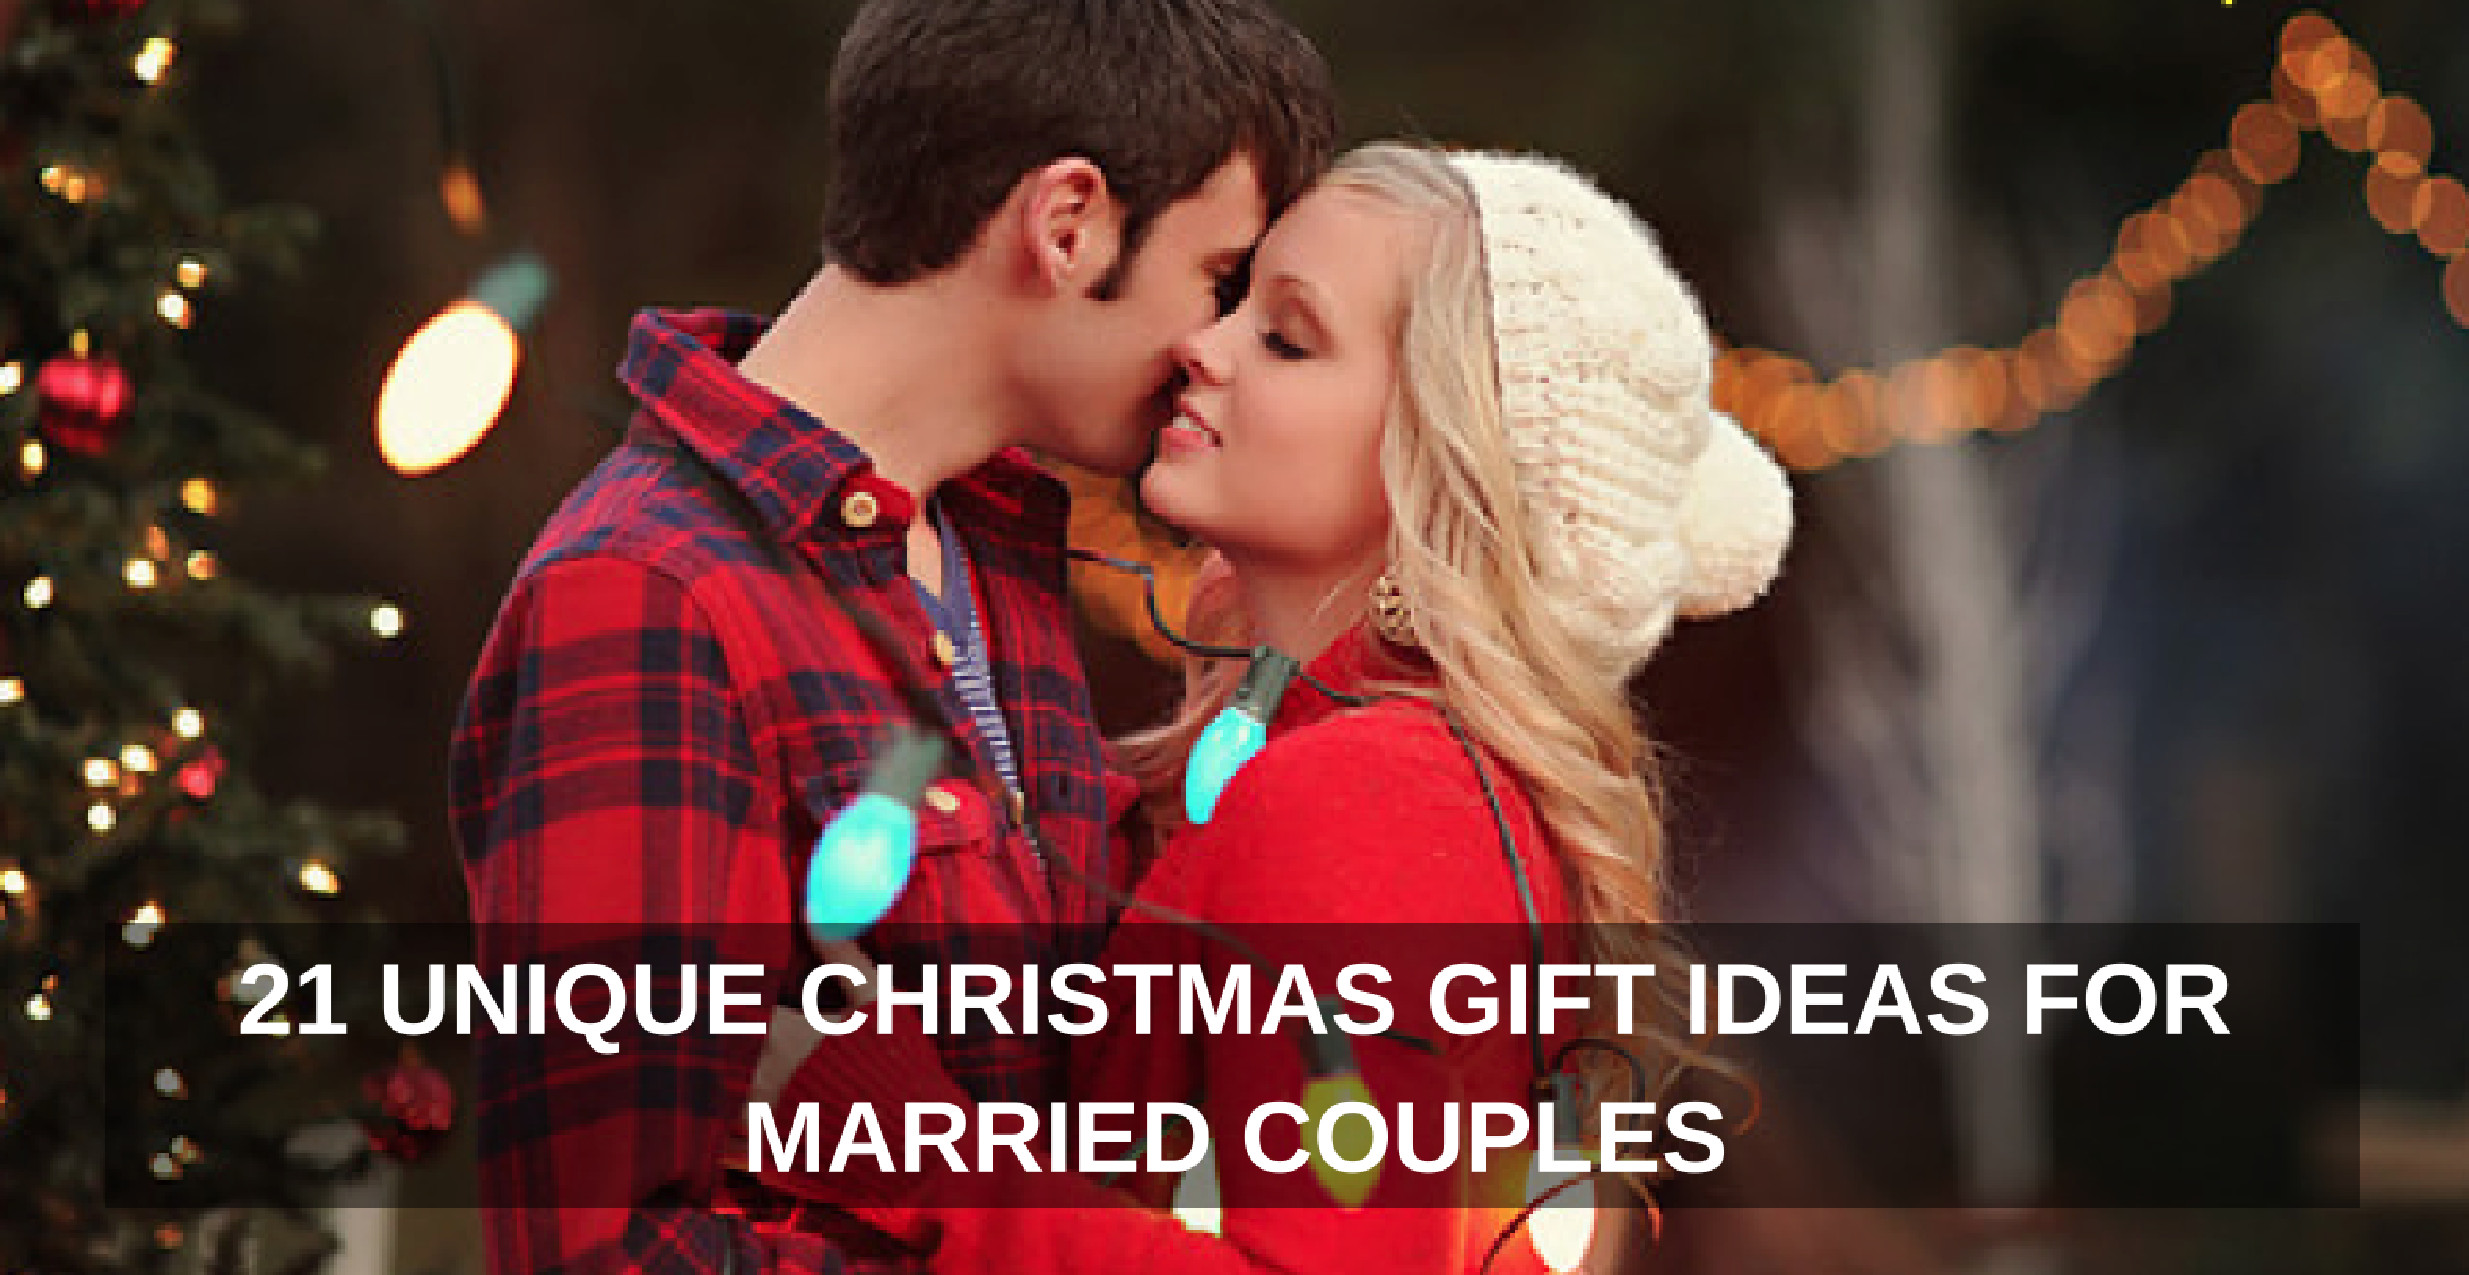 Holiday Gift Ideas Couples
 21 Unique Christmas Gift Ideas for Married Couples